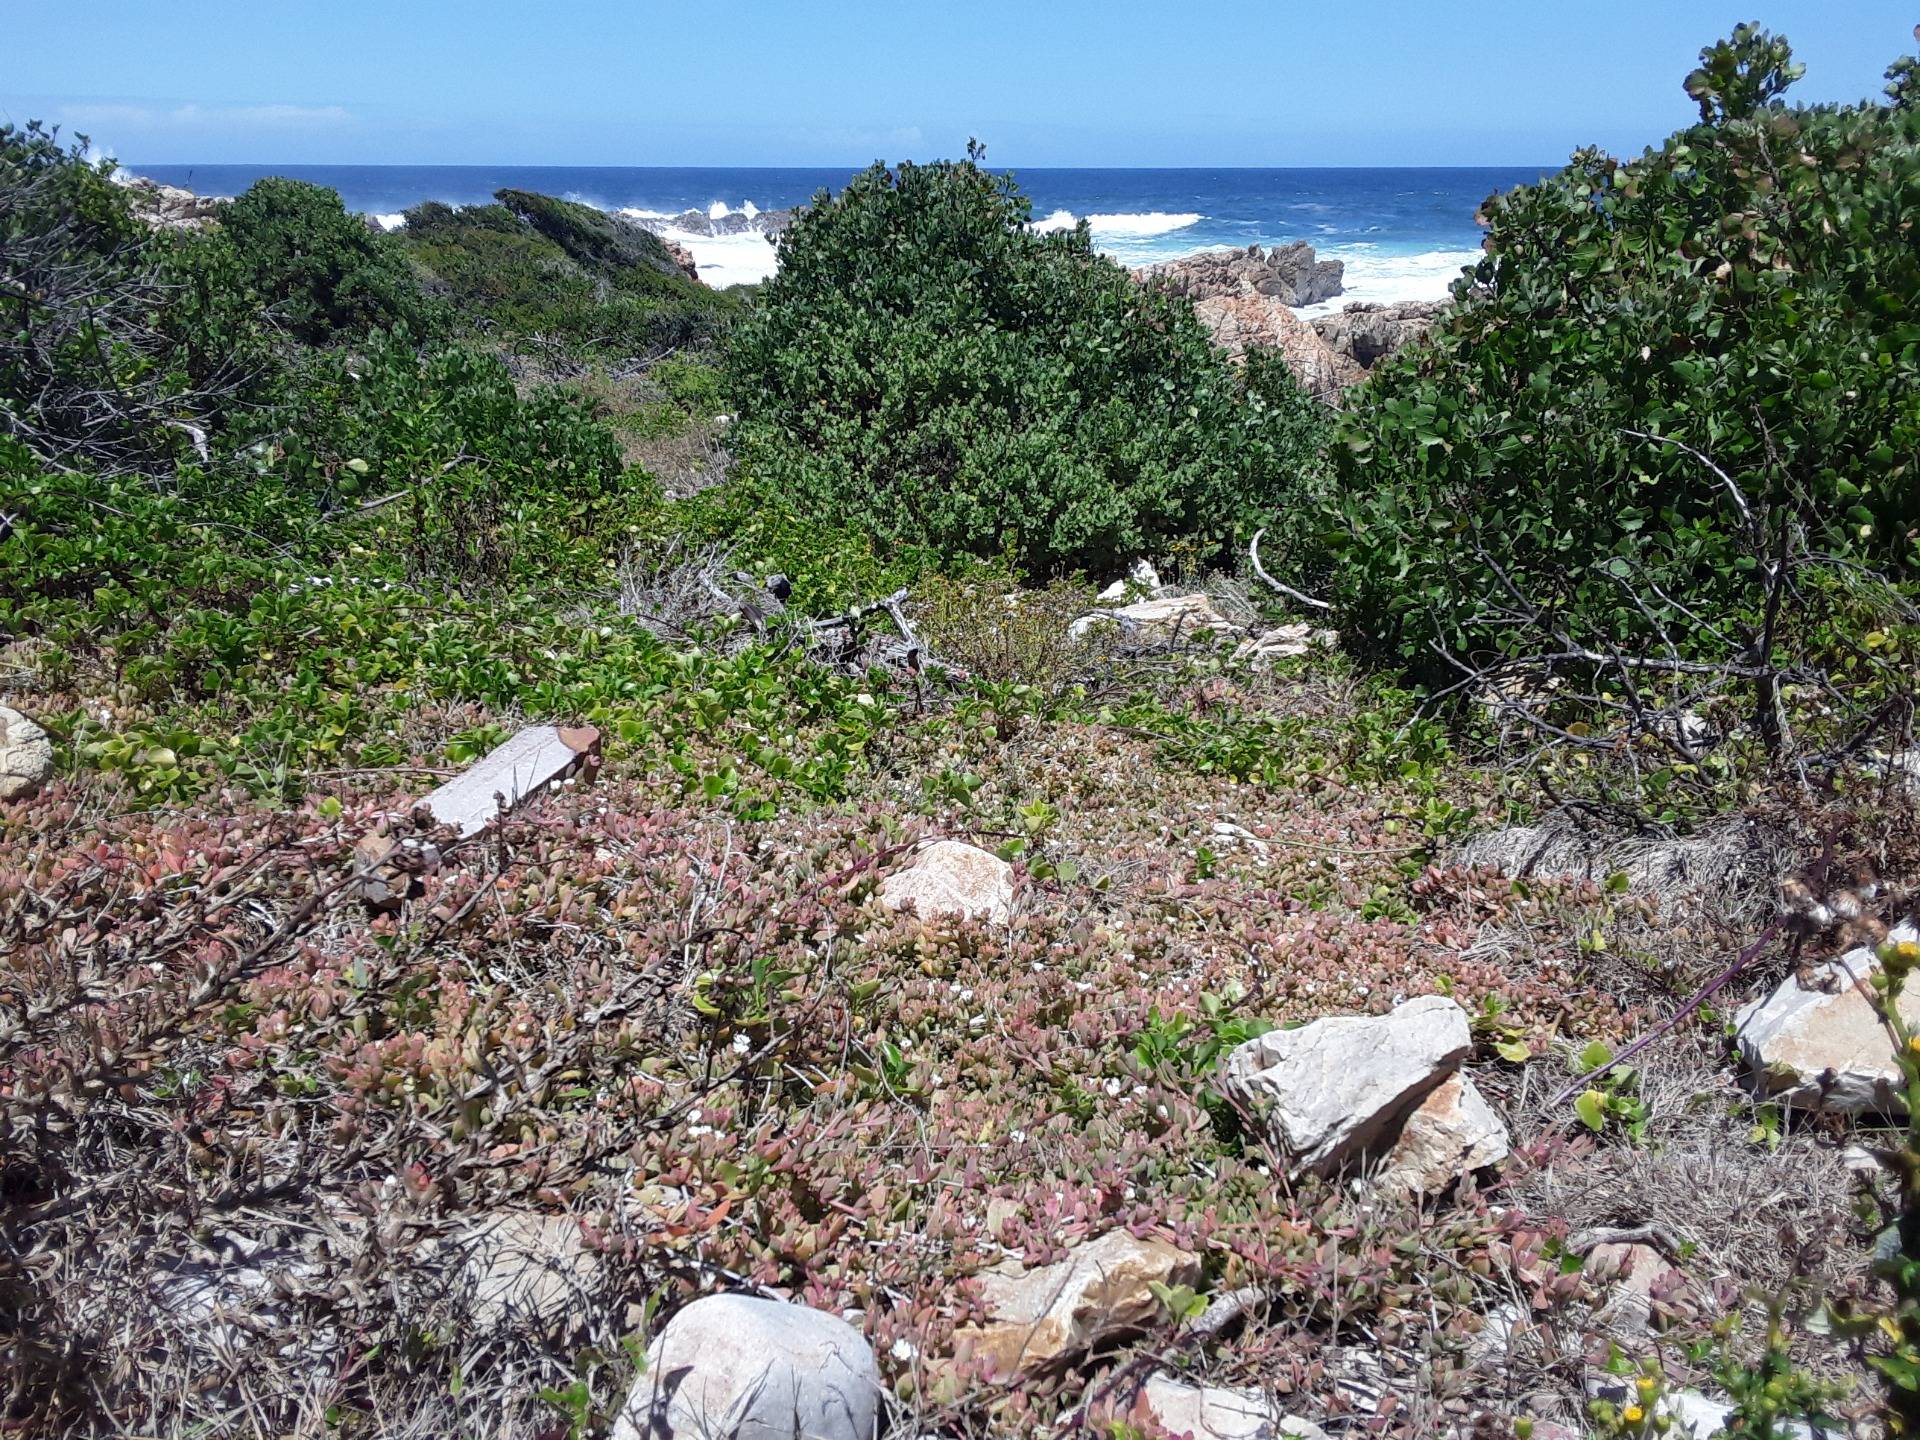 Indigenous vegetation growing right up to the shoreline